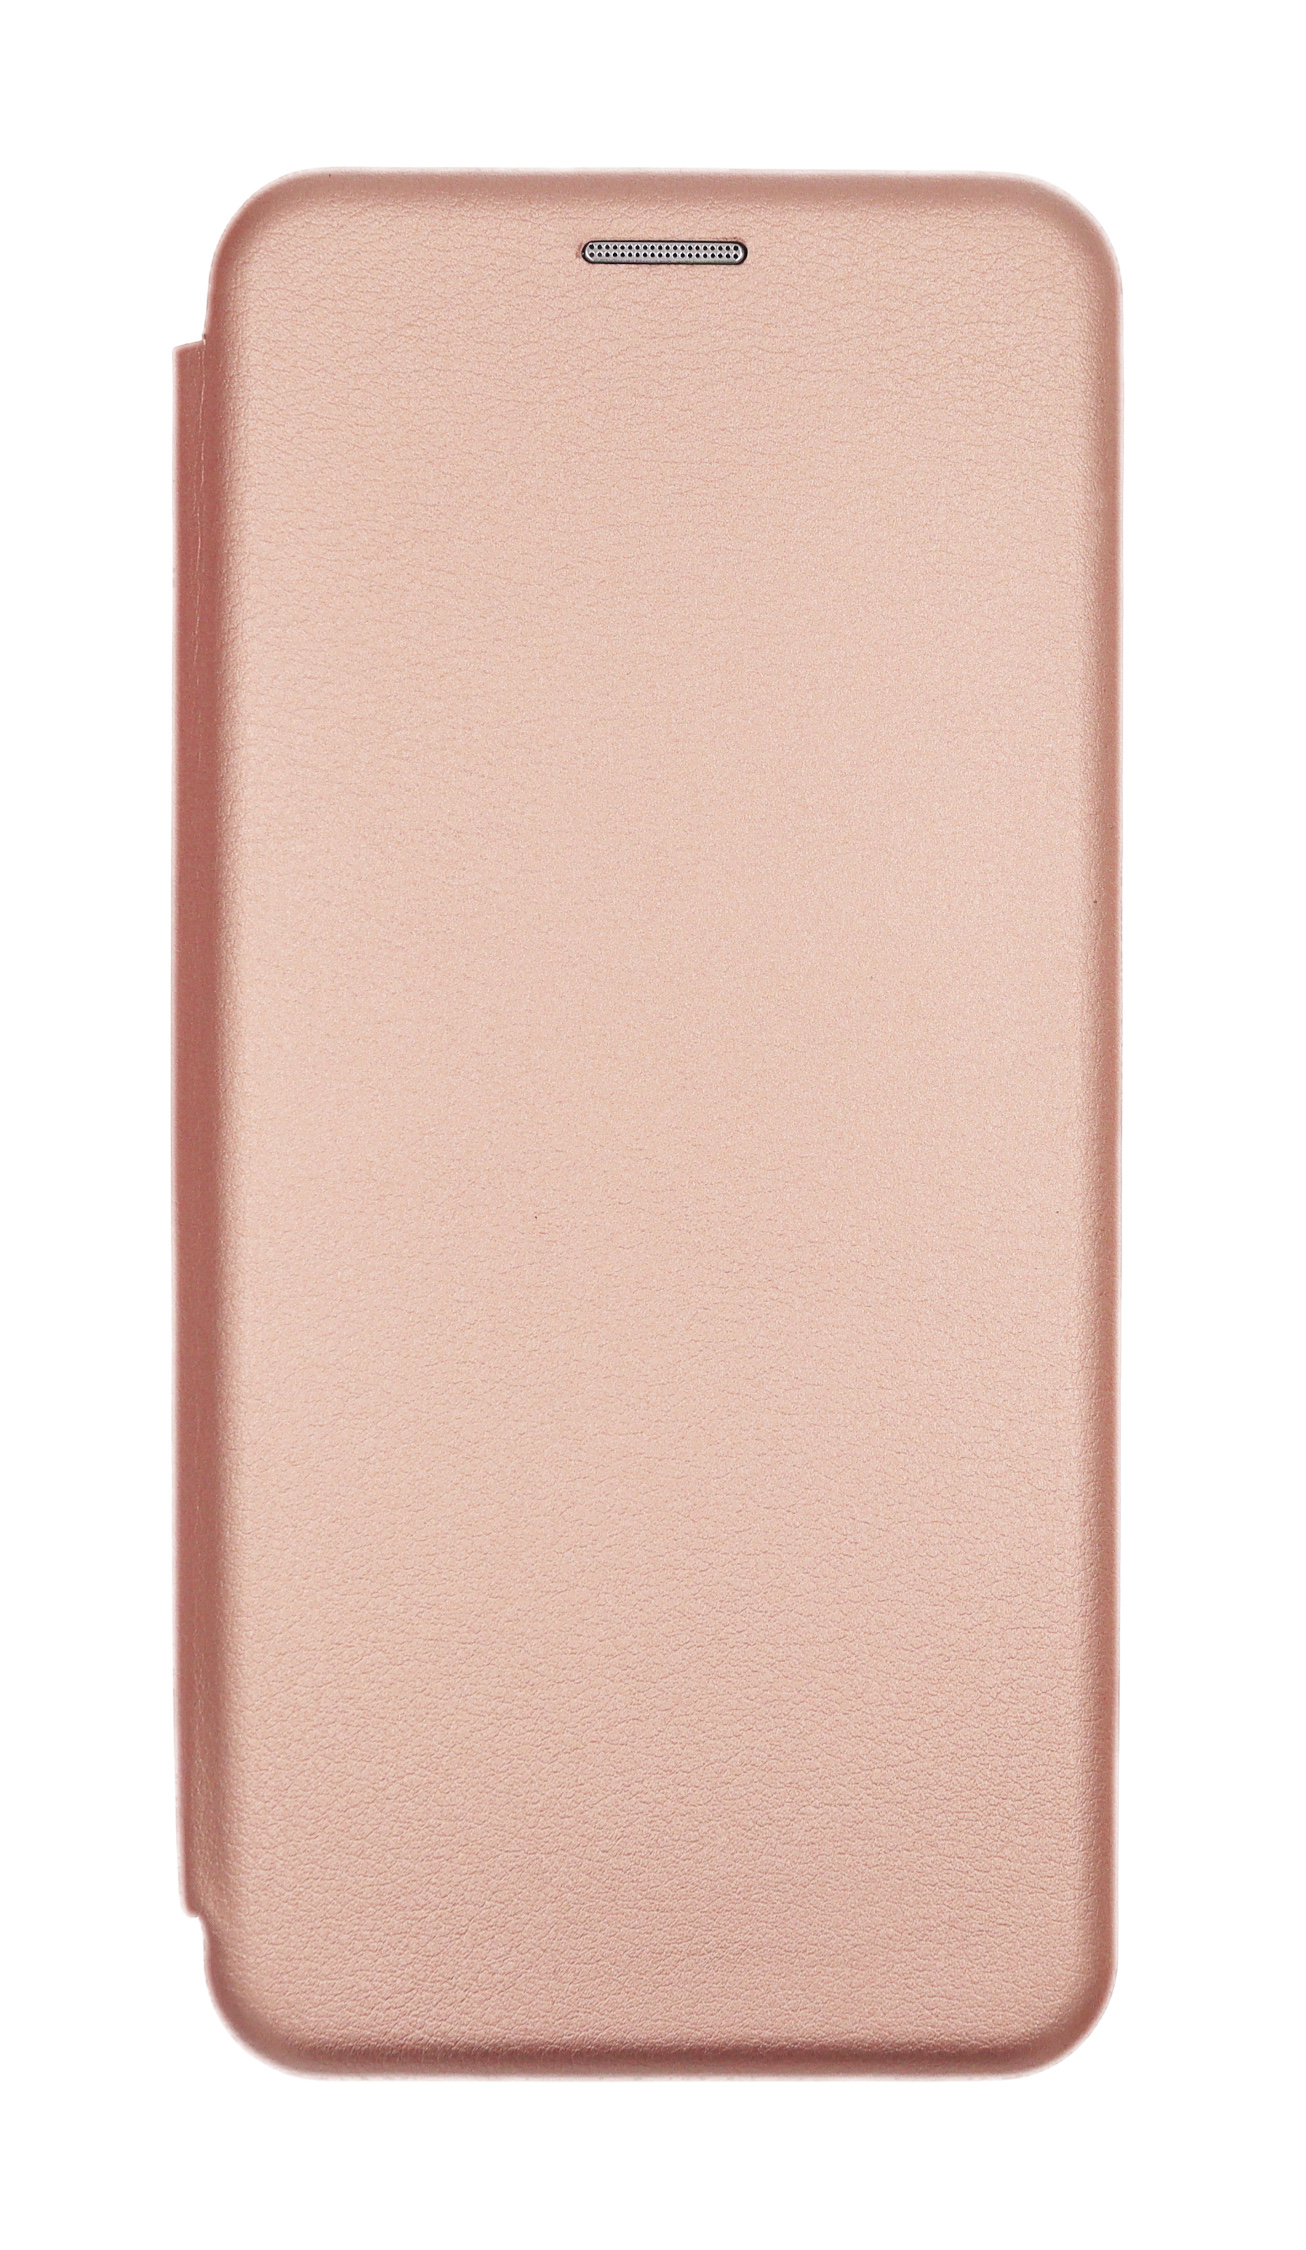 JAMCOVER Bookcase A53 5G, Rounded, Samsung, Galaxy Bookcover, Rosé